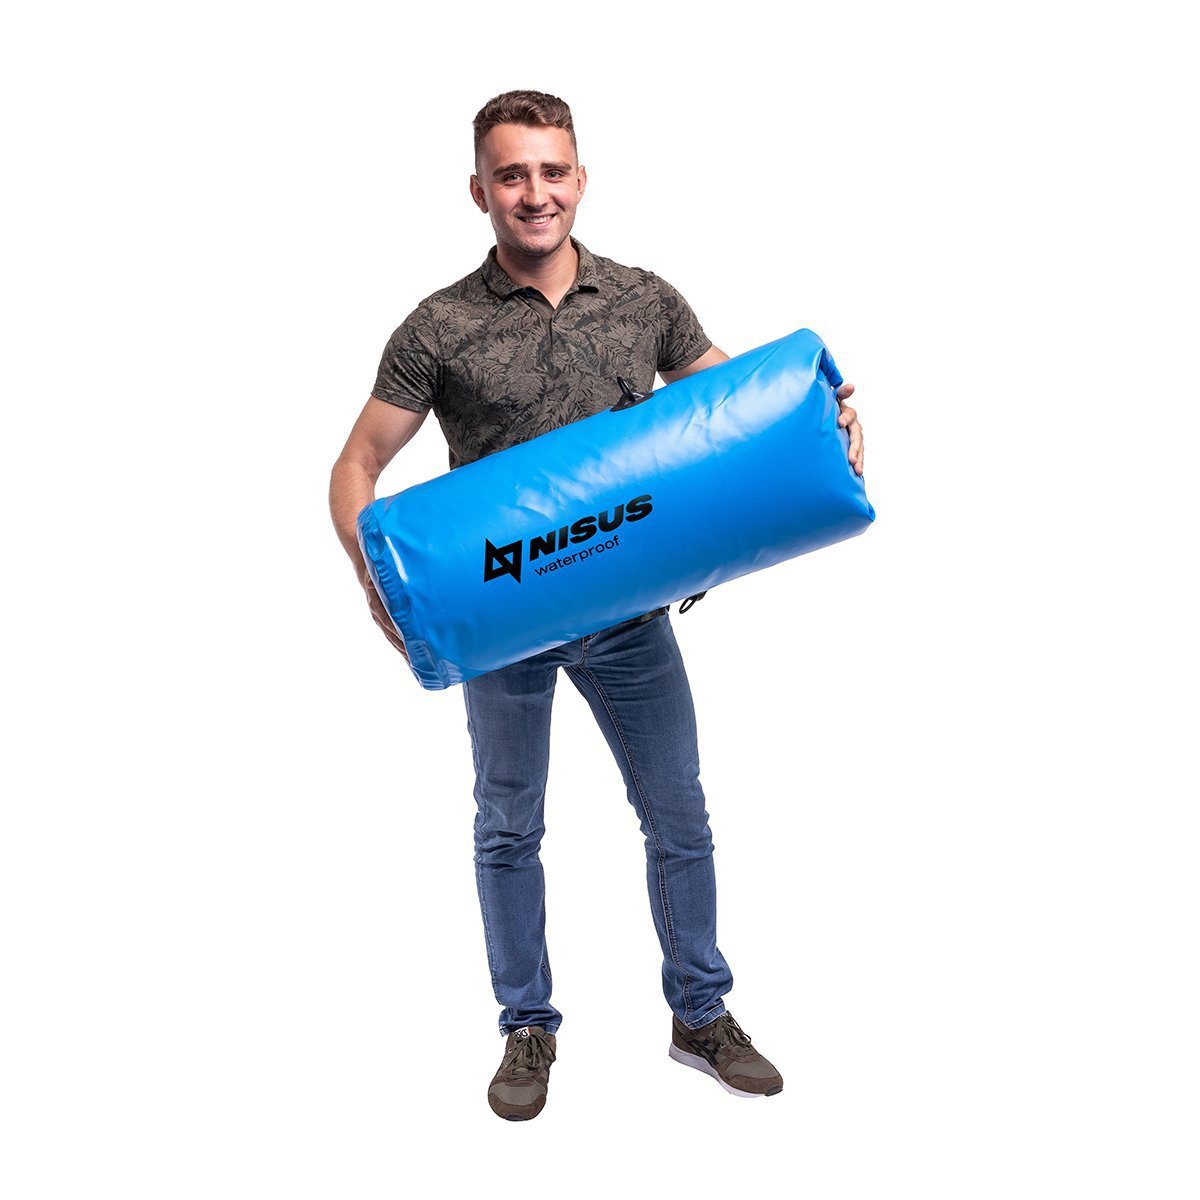 A man carrying a 70L Waterproof Large Dry Bag, Backpack with Shoulder Straps, Blue